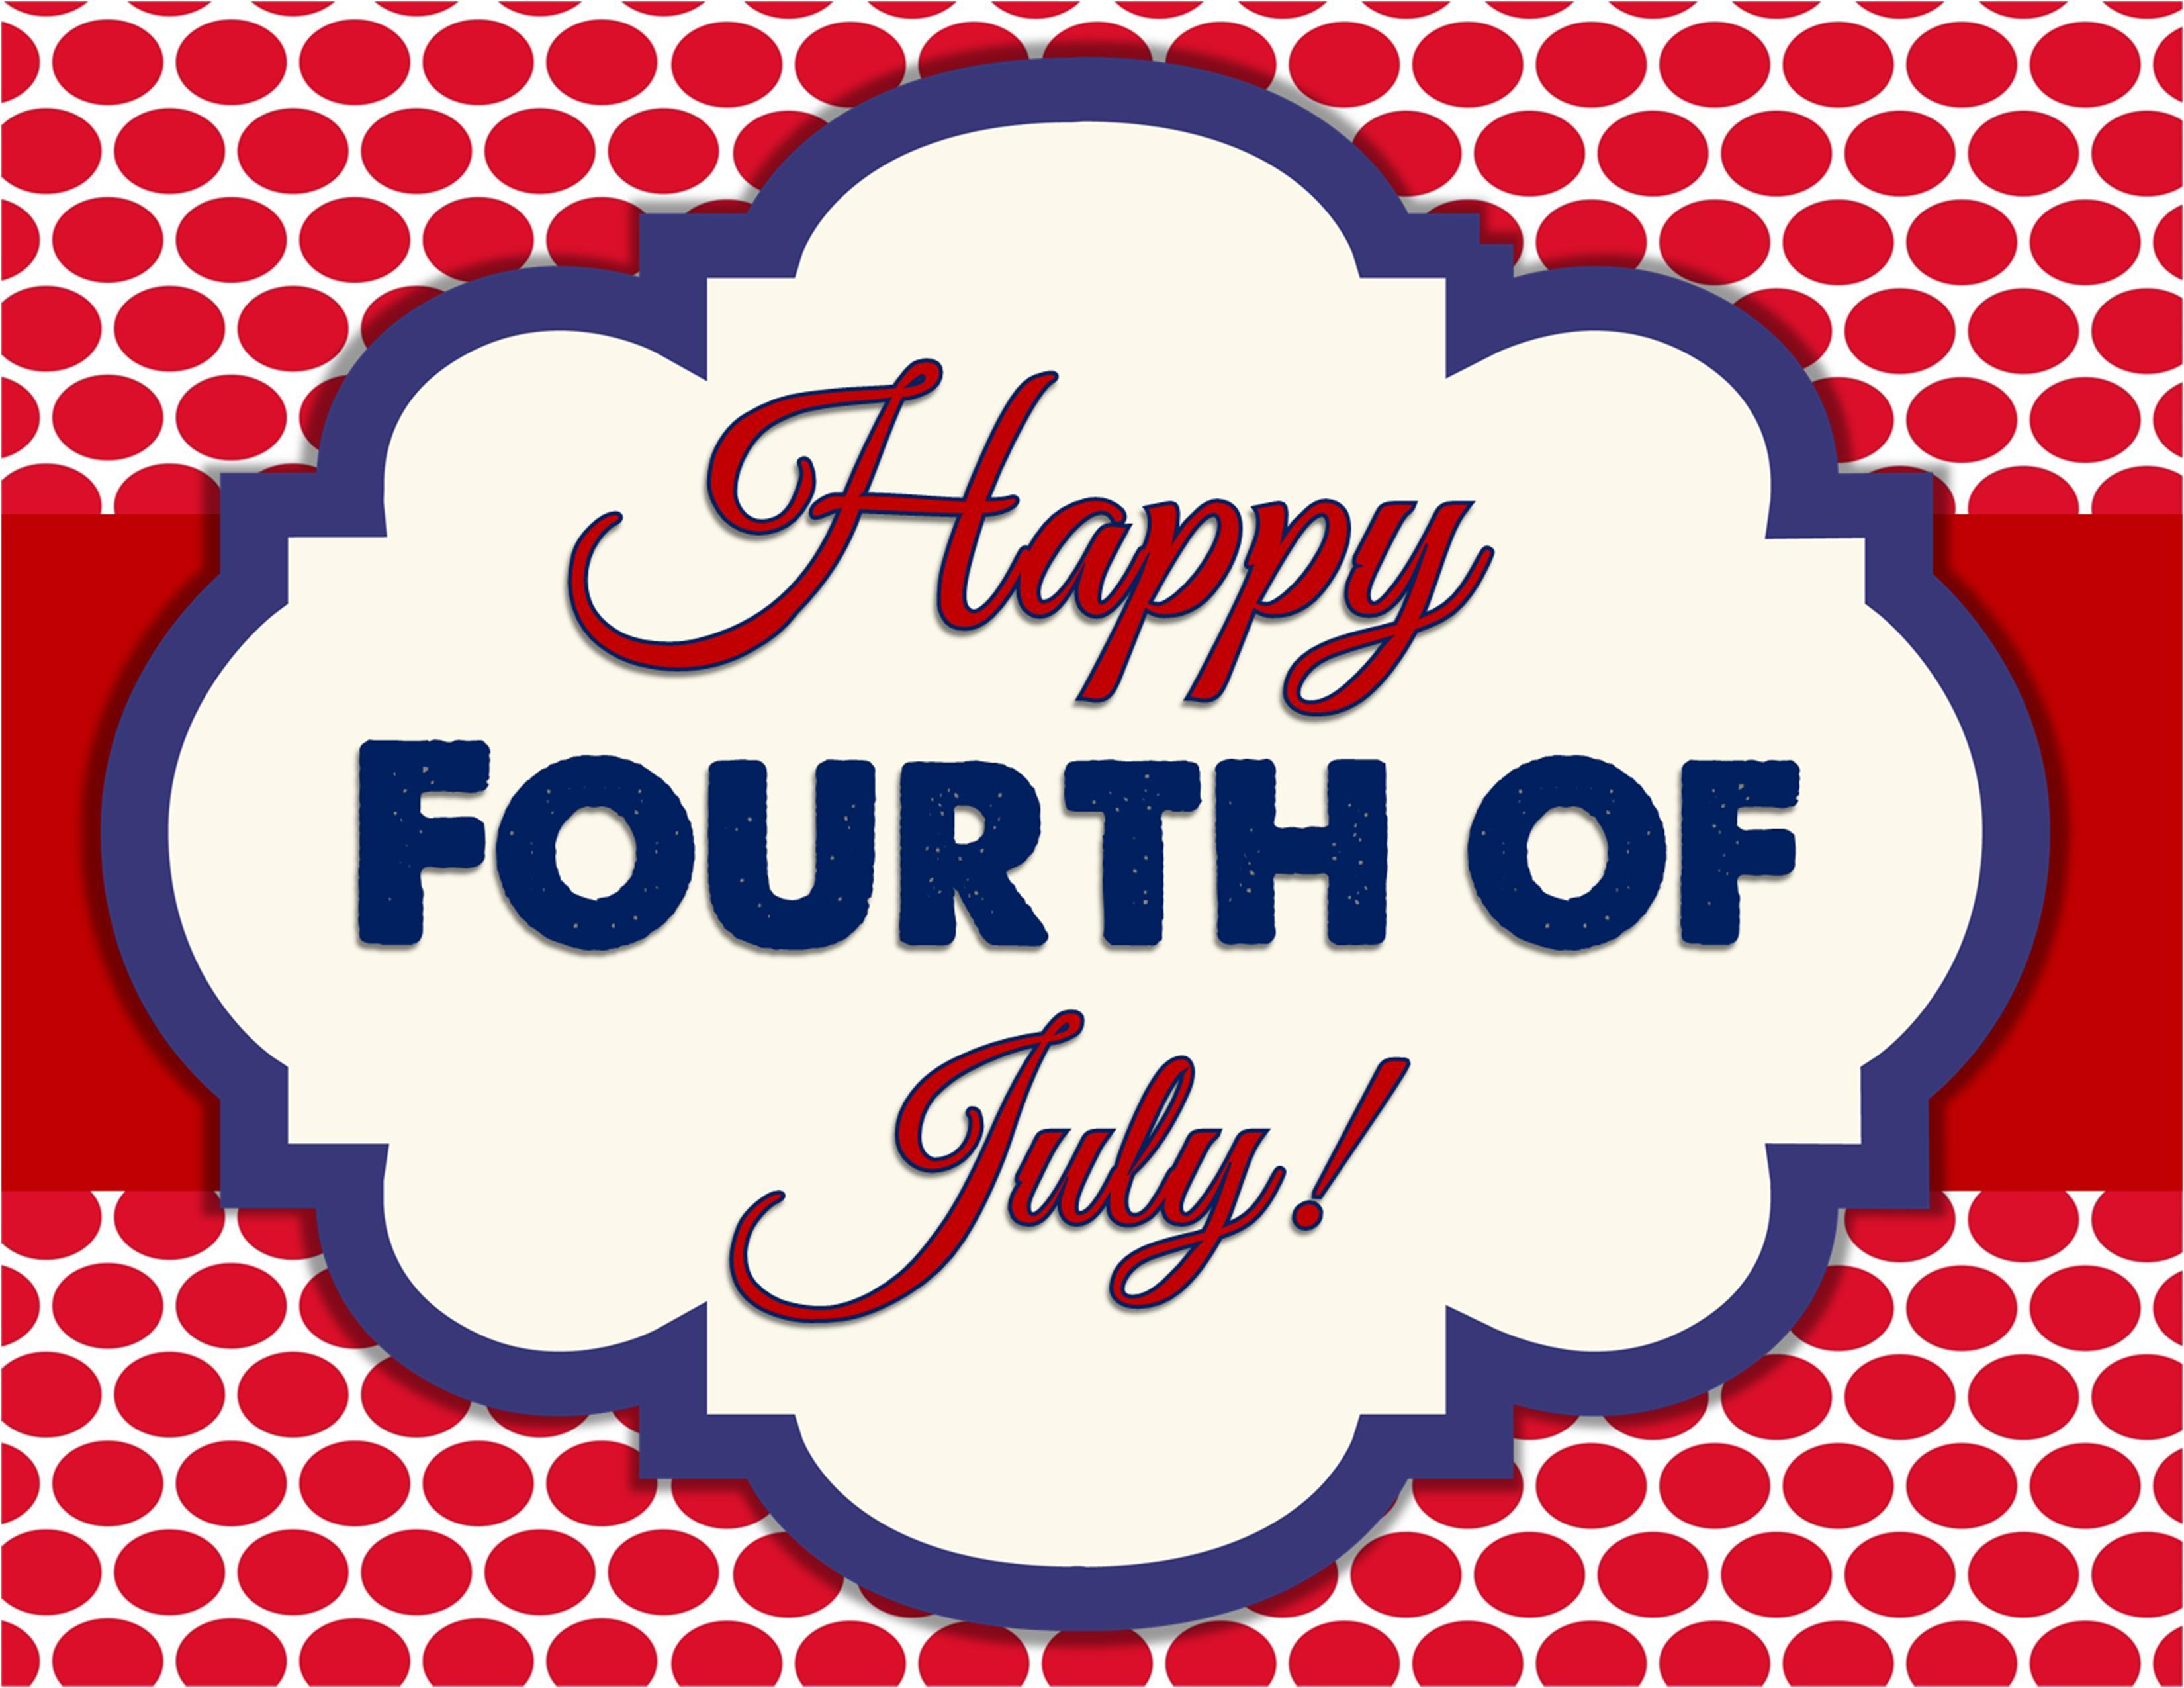 Happy 4th Of July Image 2019: Fourth Of July Picture Photo Wallpaper